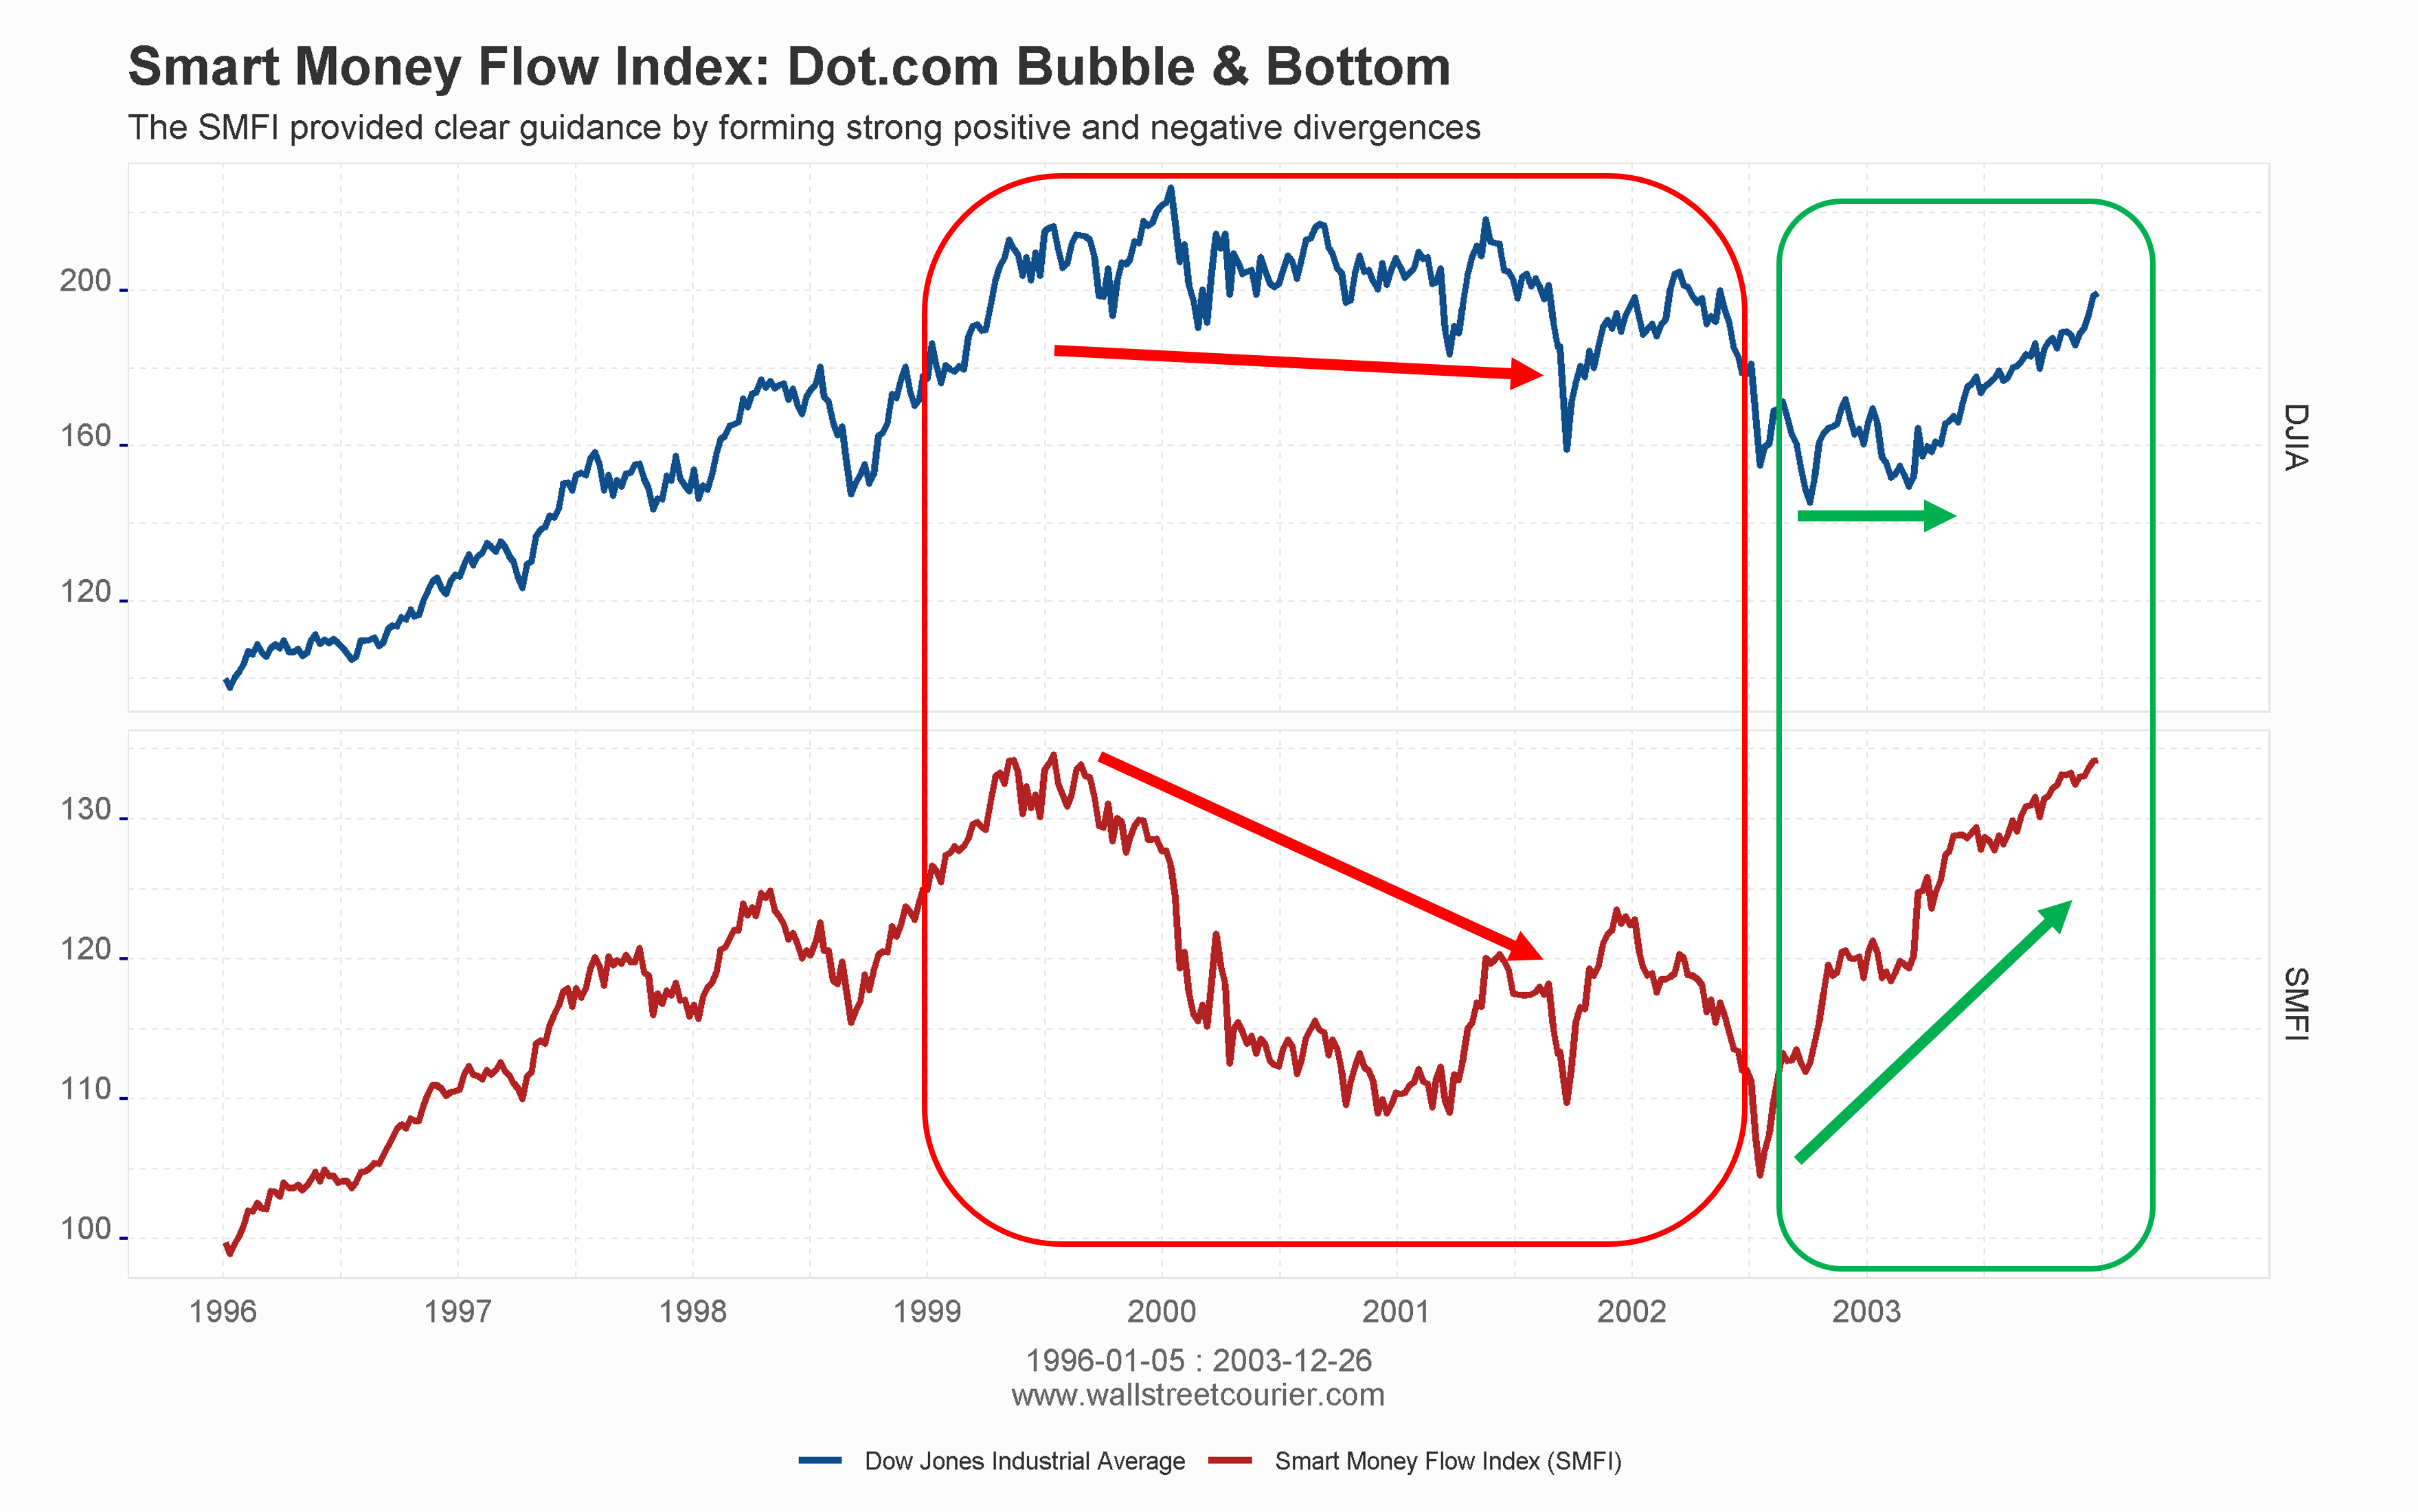 Chart showing the Smart Money Flow Index's performance during the dot-com boom of the late 1990s, demonstrating its ability to react strongly to upcoming market changes and providing a valuable indication of the impending market downturn